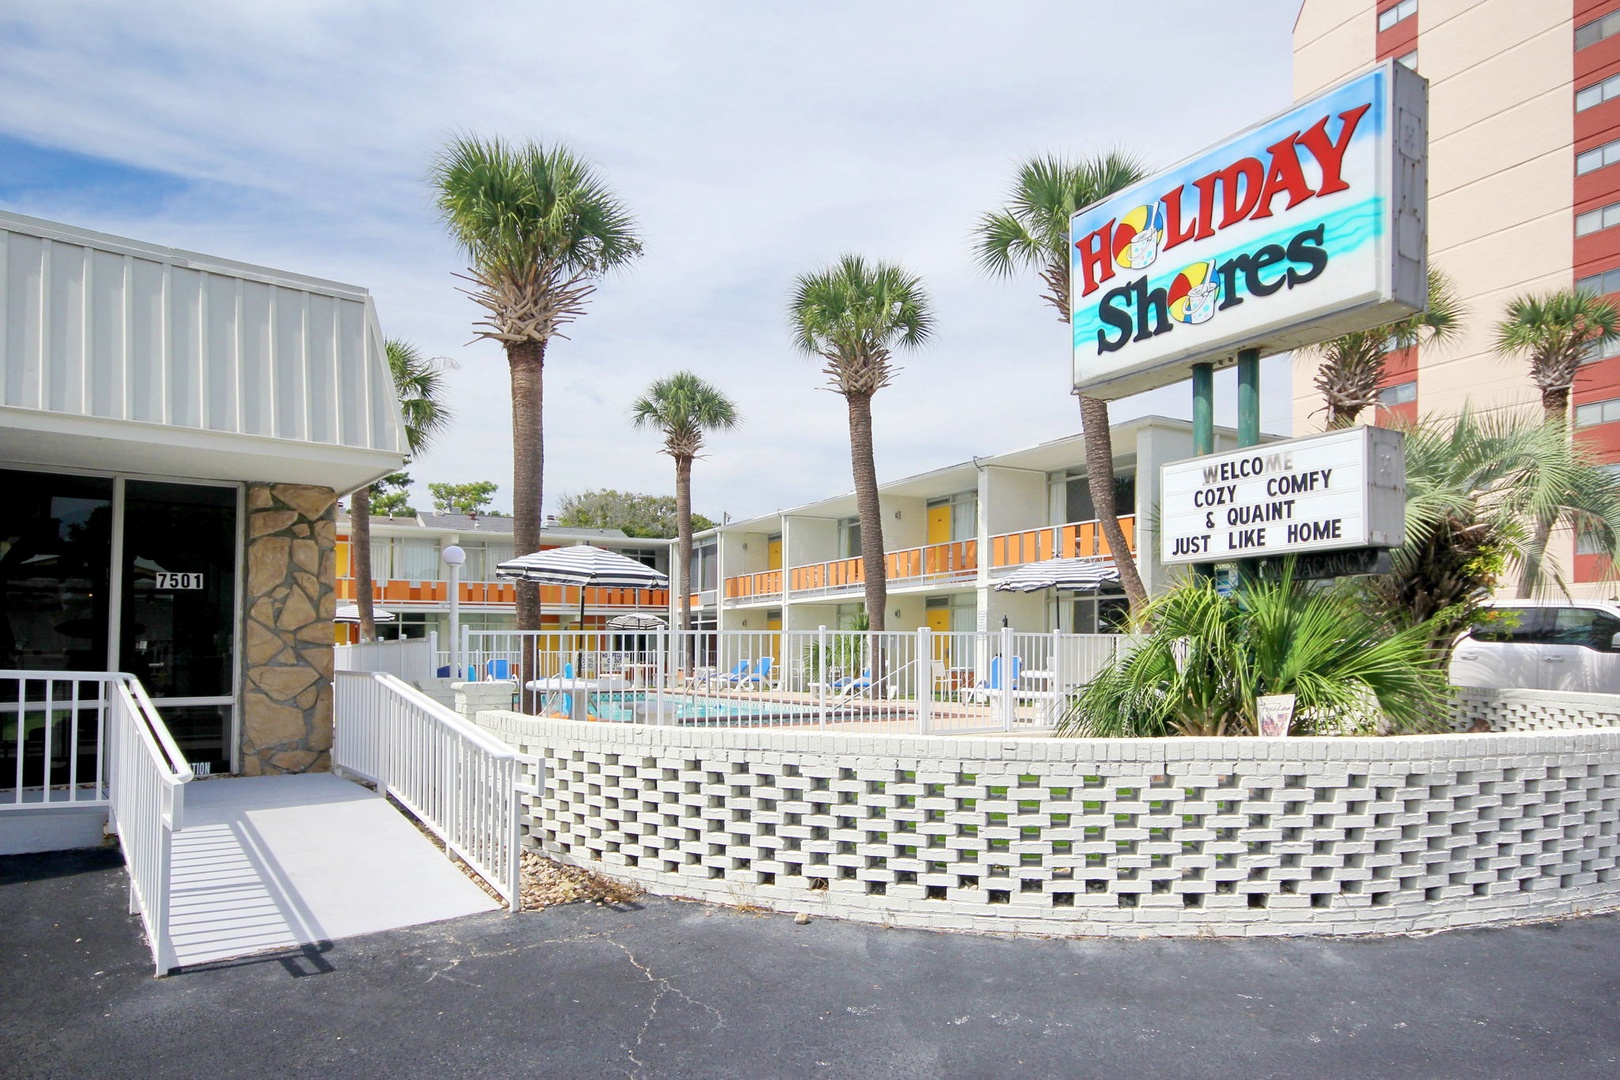 family vacation rental in Myrtle Beach